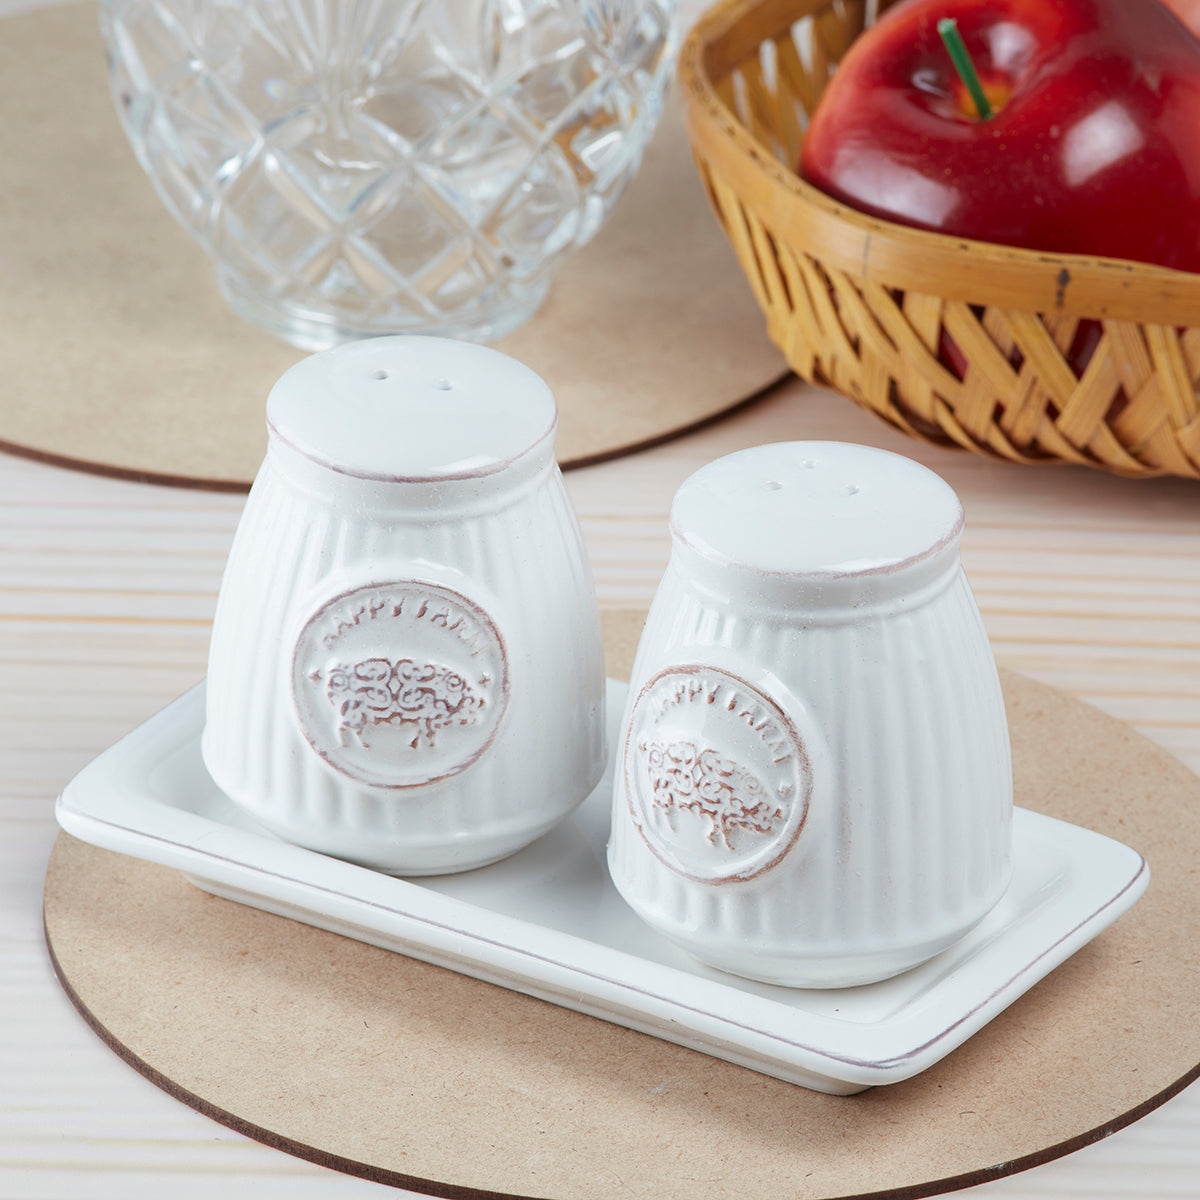 Ceramic Salt Pepper Container Set with tray for Dining Table (9964)